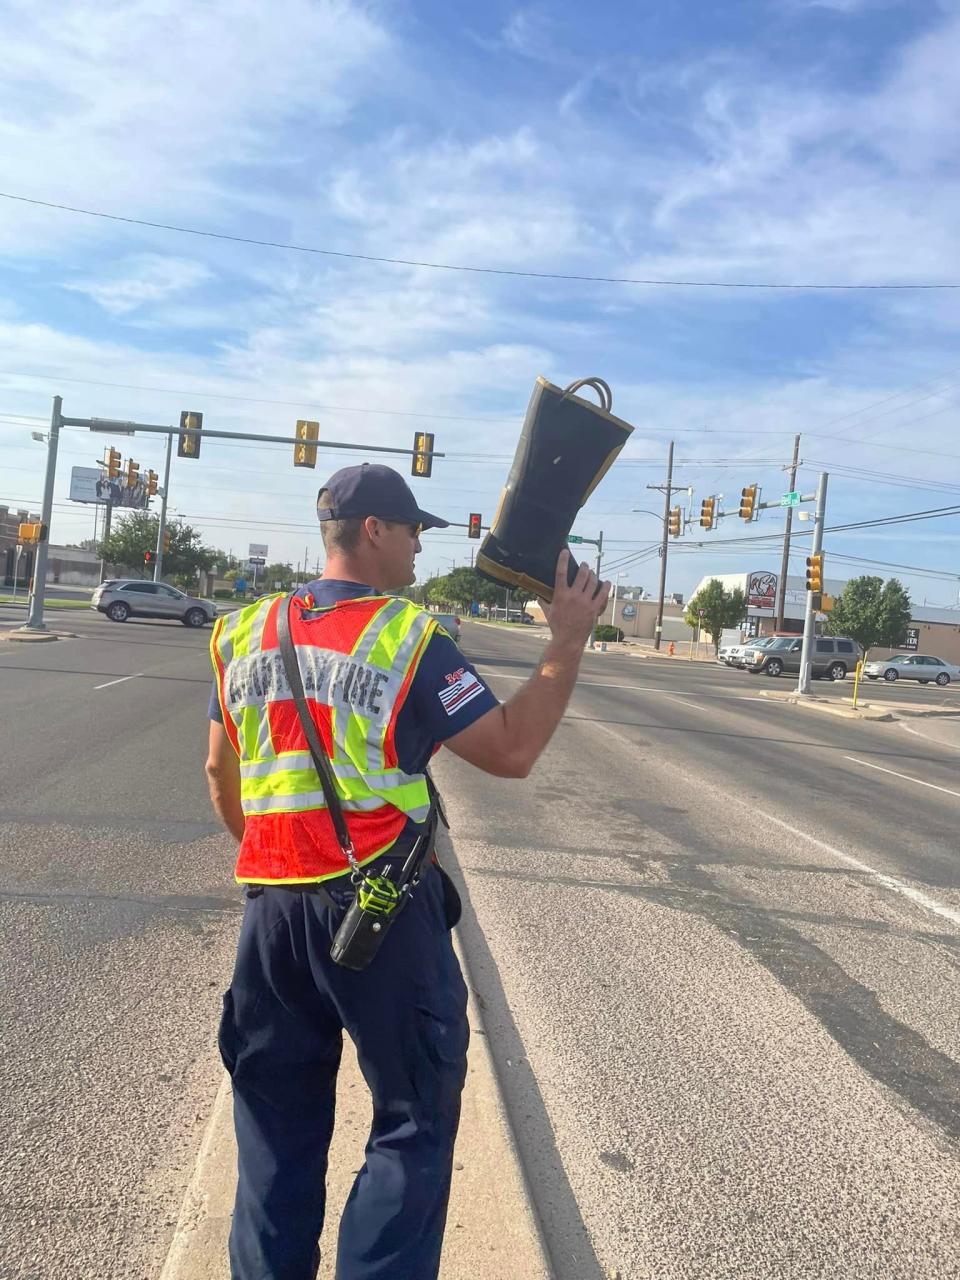 Amarillo Fire Department hosts its annual Fill the Boot Campaign, collecting donations at intersections across Amarillo to raise funds and awareness for the Muscular Dystrophy Association, Aug. 31 through Sept. 2.